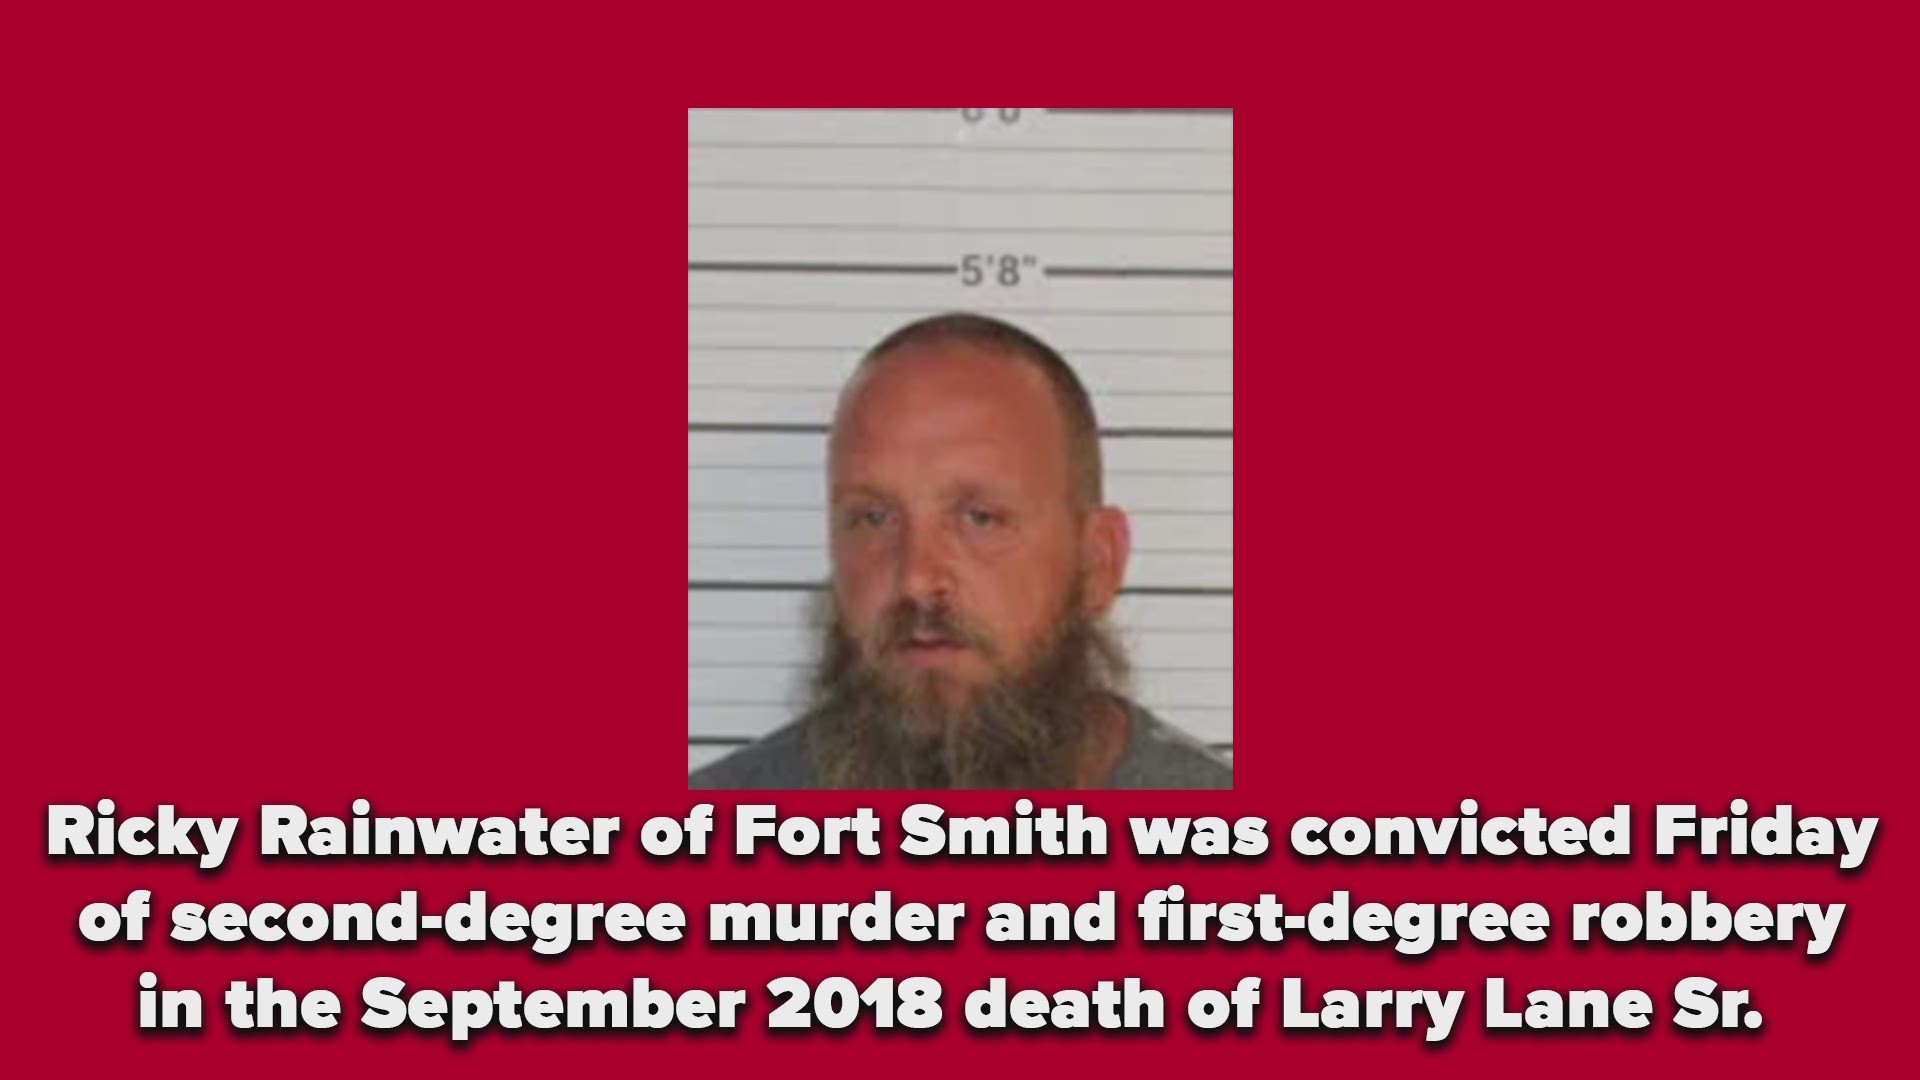 Ricky Rainwater of Fort Smith was convicted Friday of second-degree murder and first-degree robbery in the September 2018 death of Larry Lane Sr. in Cherokee County.